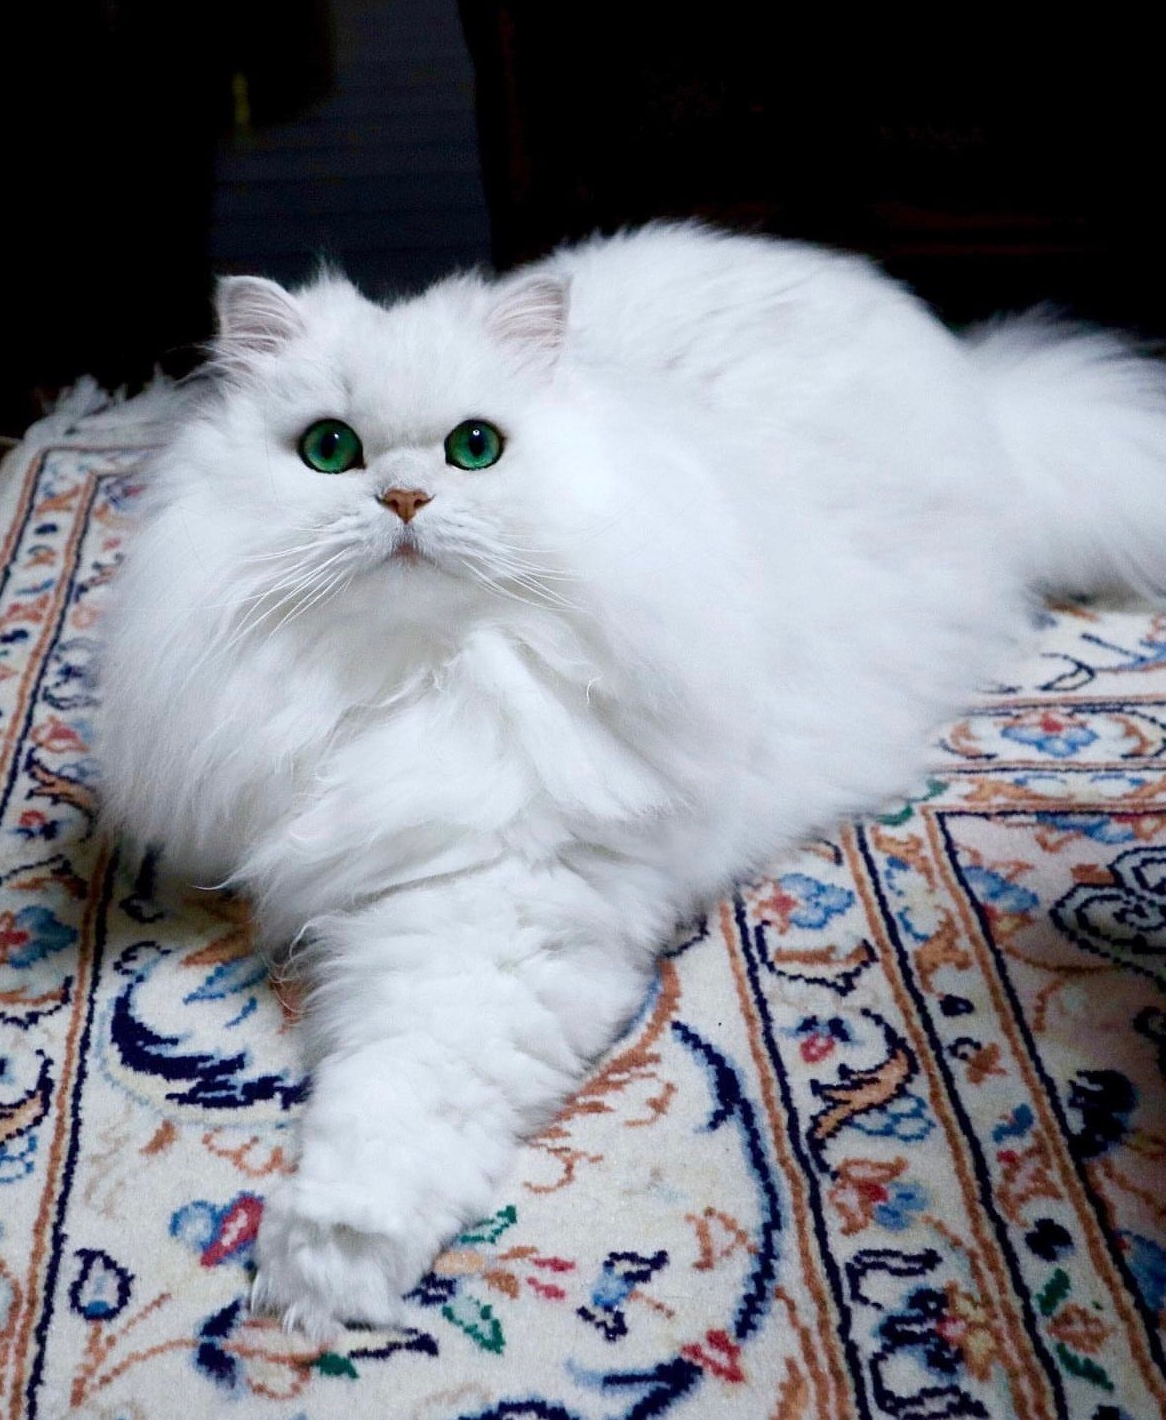 Behold the Beauty: Introducing the Most Stunning Cat Angel You’ve Ever Seen.NgocChau